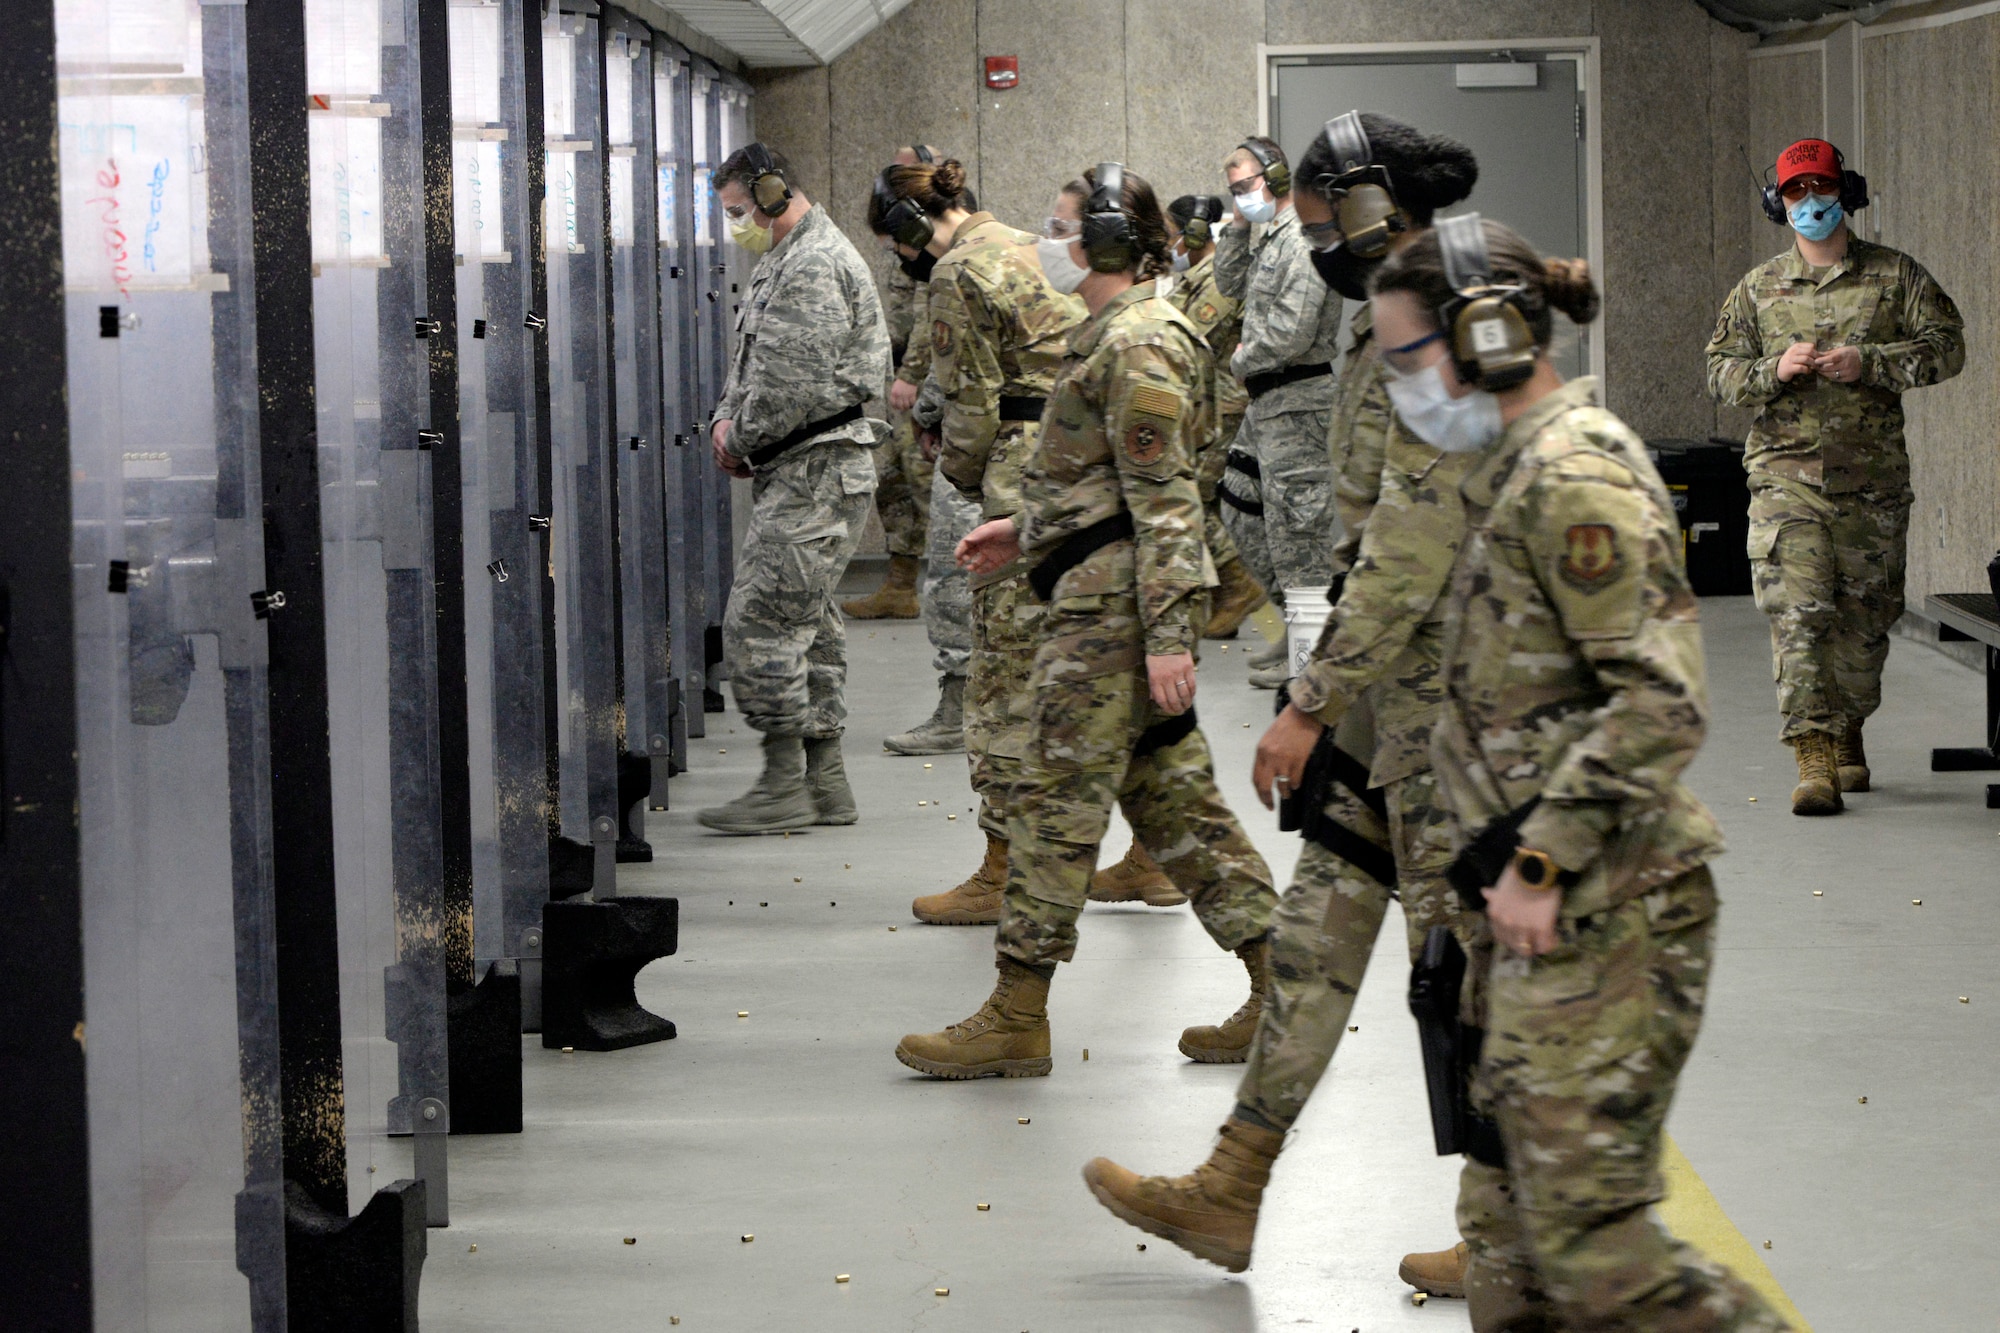 Air Force personnel with the 88th Medical Group step to the firing line inside the 88th Security Forces Squadron Combat Arms firing range at Wright-Patterson Air Force Base, Ohio on Feb. 18, 2021. The Airmen were qualifying with the M9 pistol as part of the readiness standards for the 88th Air Base Wing. (U.S. Air Force photo by Ty Greenlees)